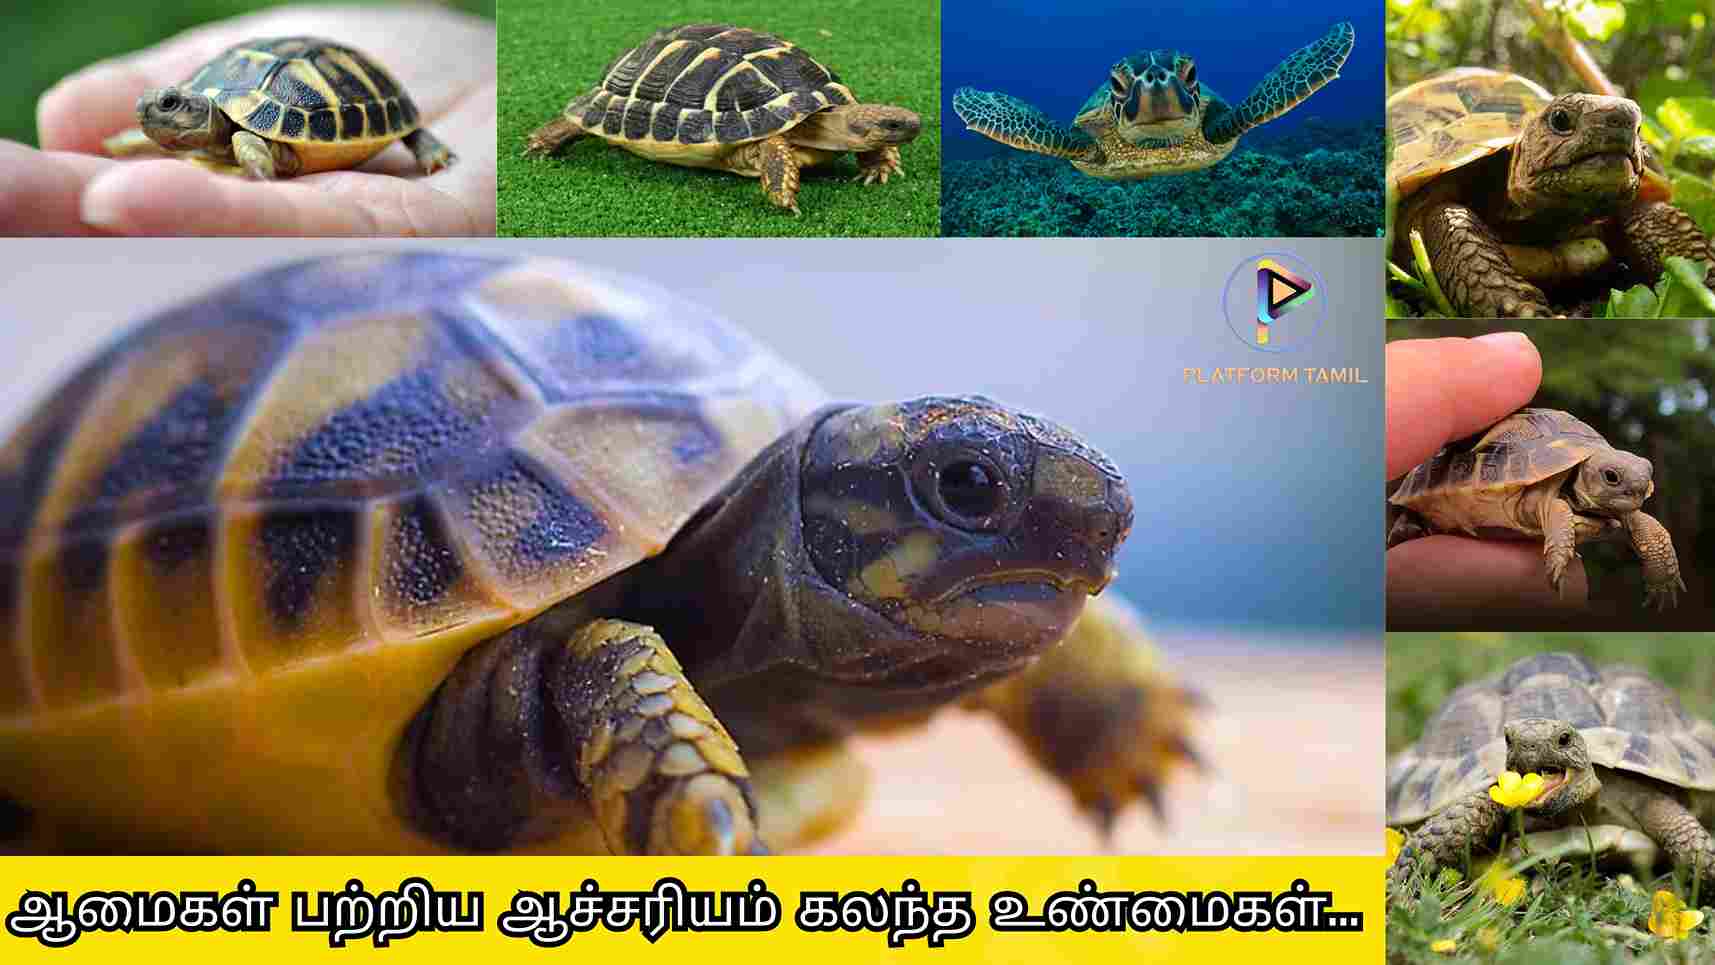 Interesting Facts About Turtles - Platform Tamil